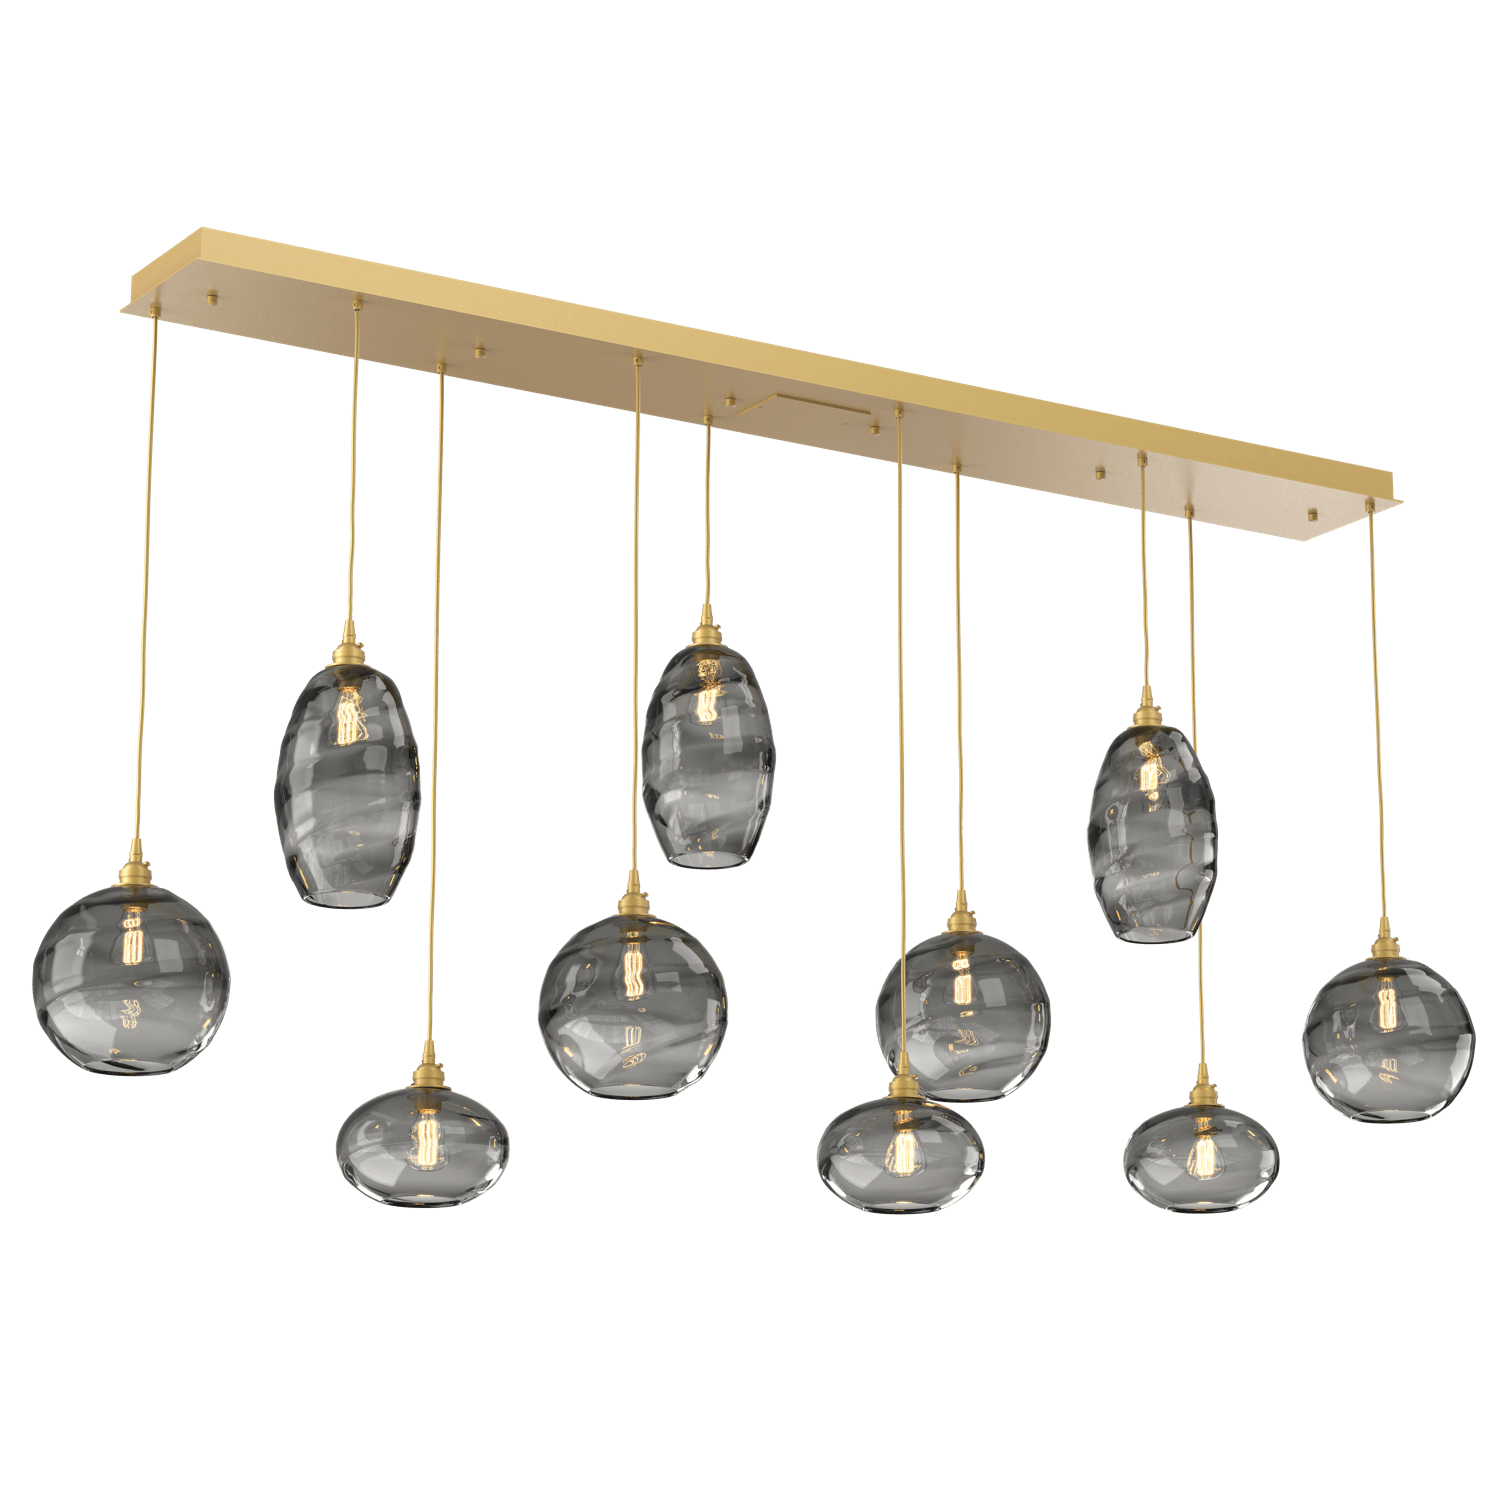 PLB0048-10-GB-OS-Hammerton-Studio-Optic-Blown-Glass-Misto-10-light-linear-pendant-chandelier-with-gilded-brass-finish-and-optic-smoke-blown-glass-shades-and-incandescent-lamping